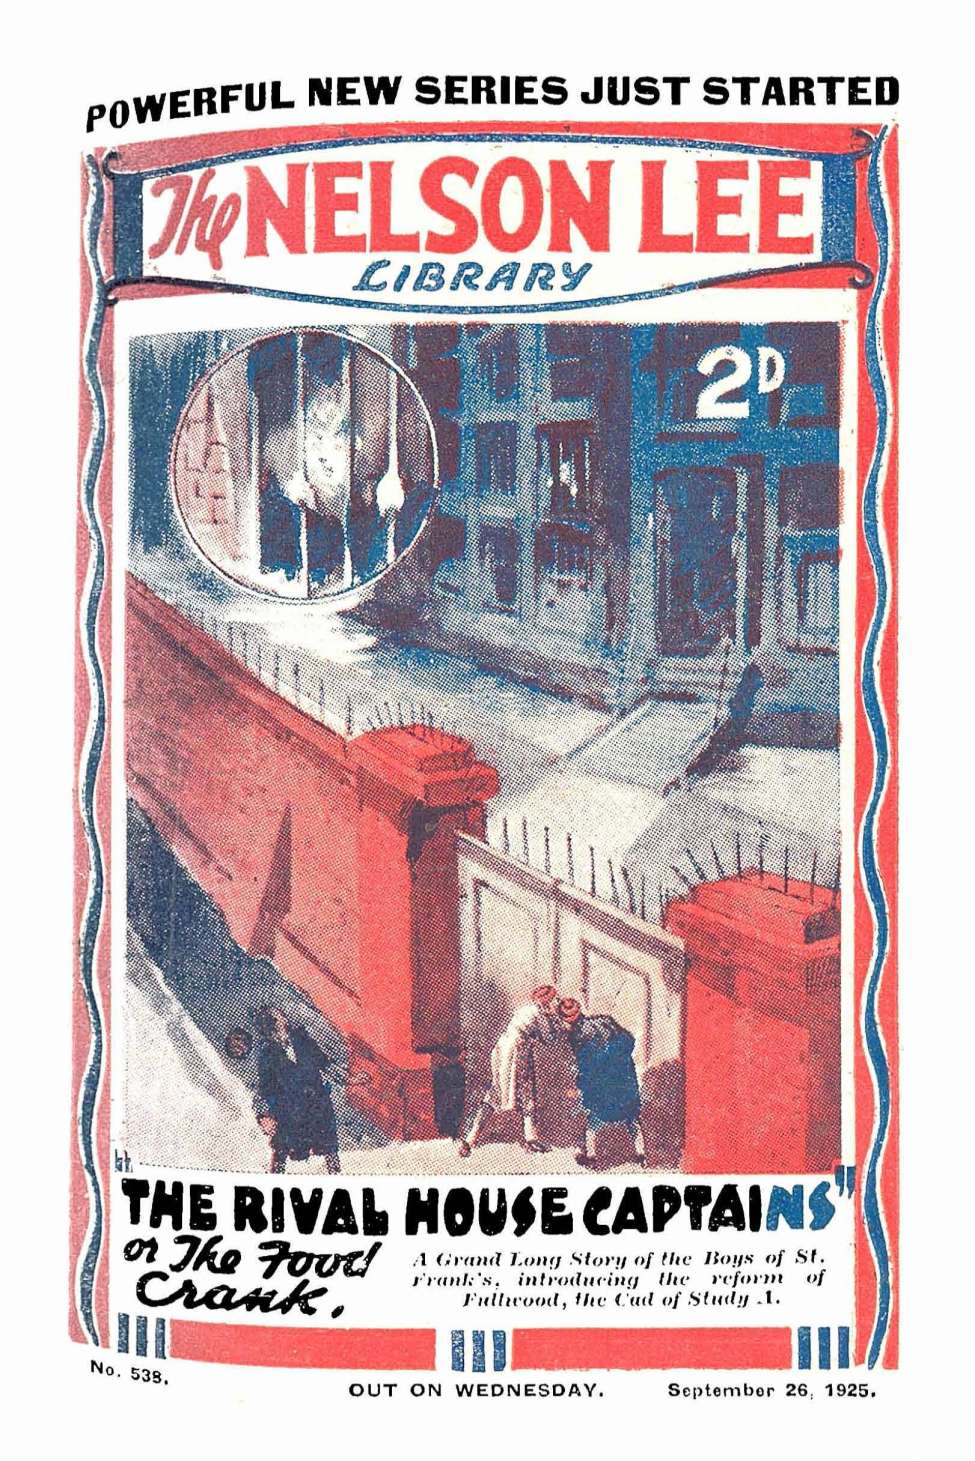 Book Cover For Nelson Lee Library s1 538 - The Rival House Captains